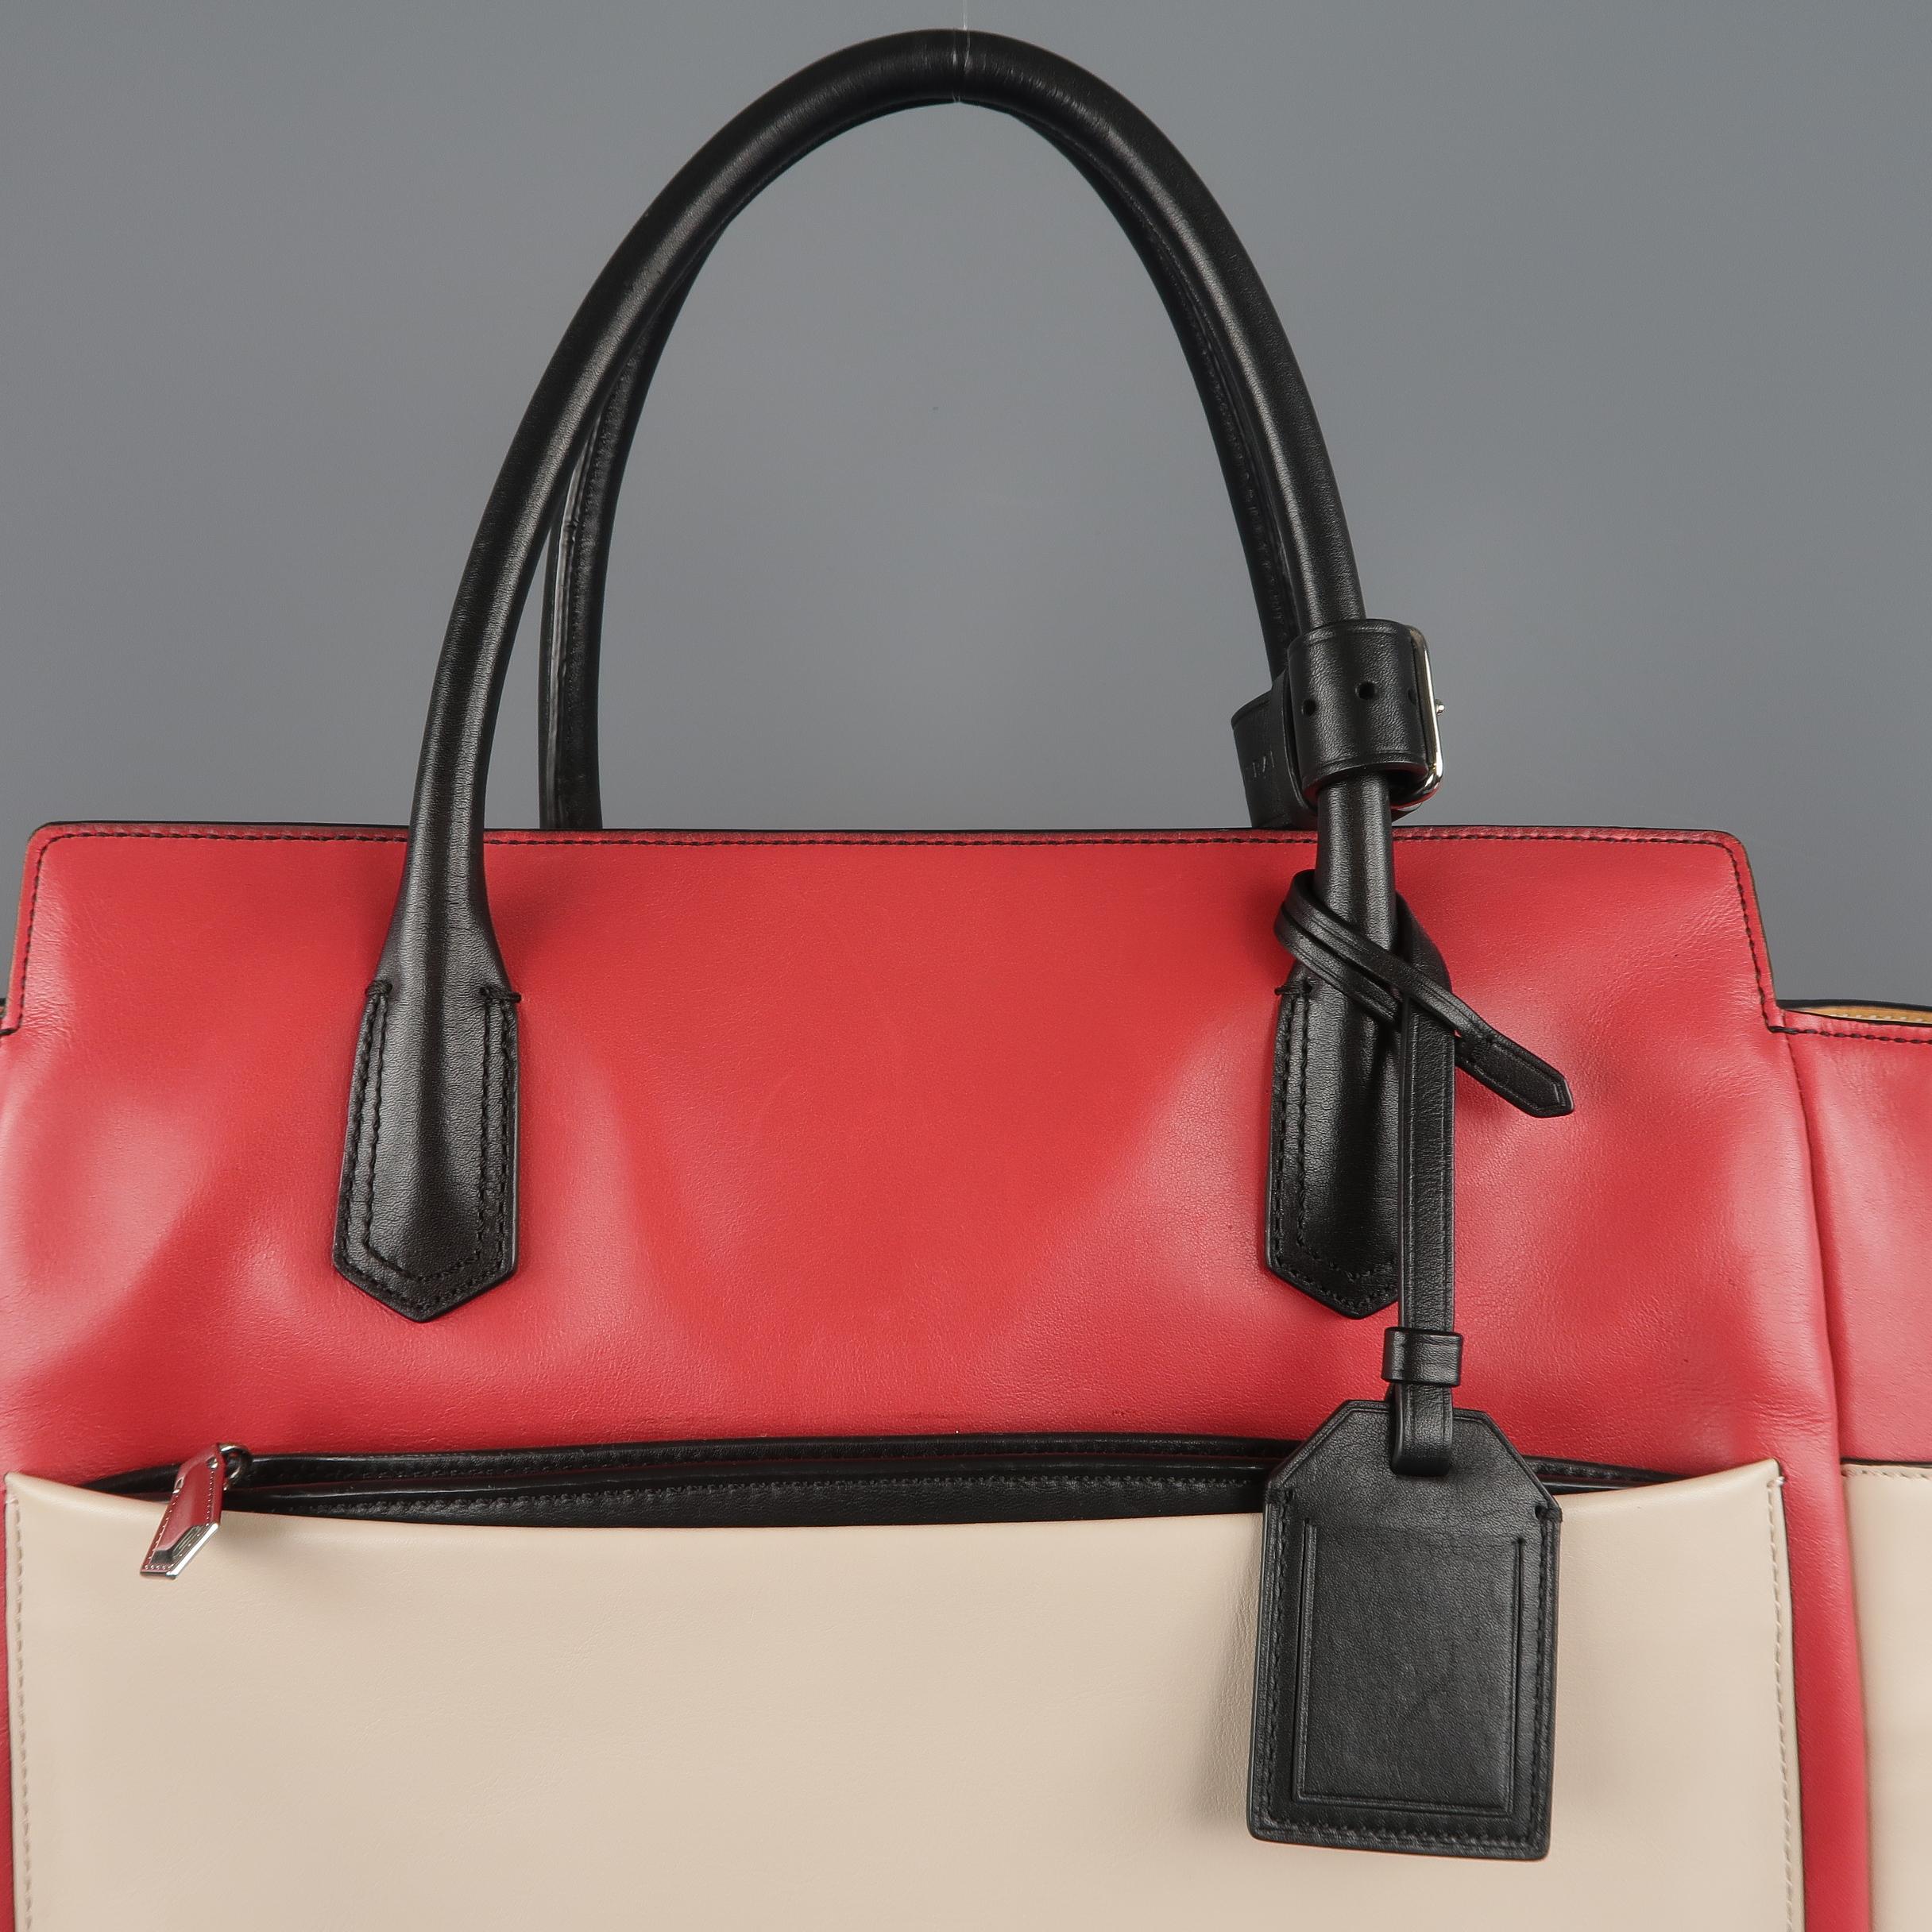 REED KRAKOFF tote bag comes in light pink leather with a light red top panel, black covered double top handles and piping, multi-pocket sides and back, and canvas interior. Some wear. Retails: $1490

Good Pre-Owned Condition.
 
Measurements:
Length: